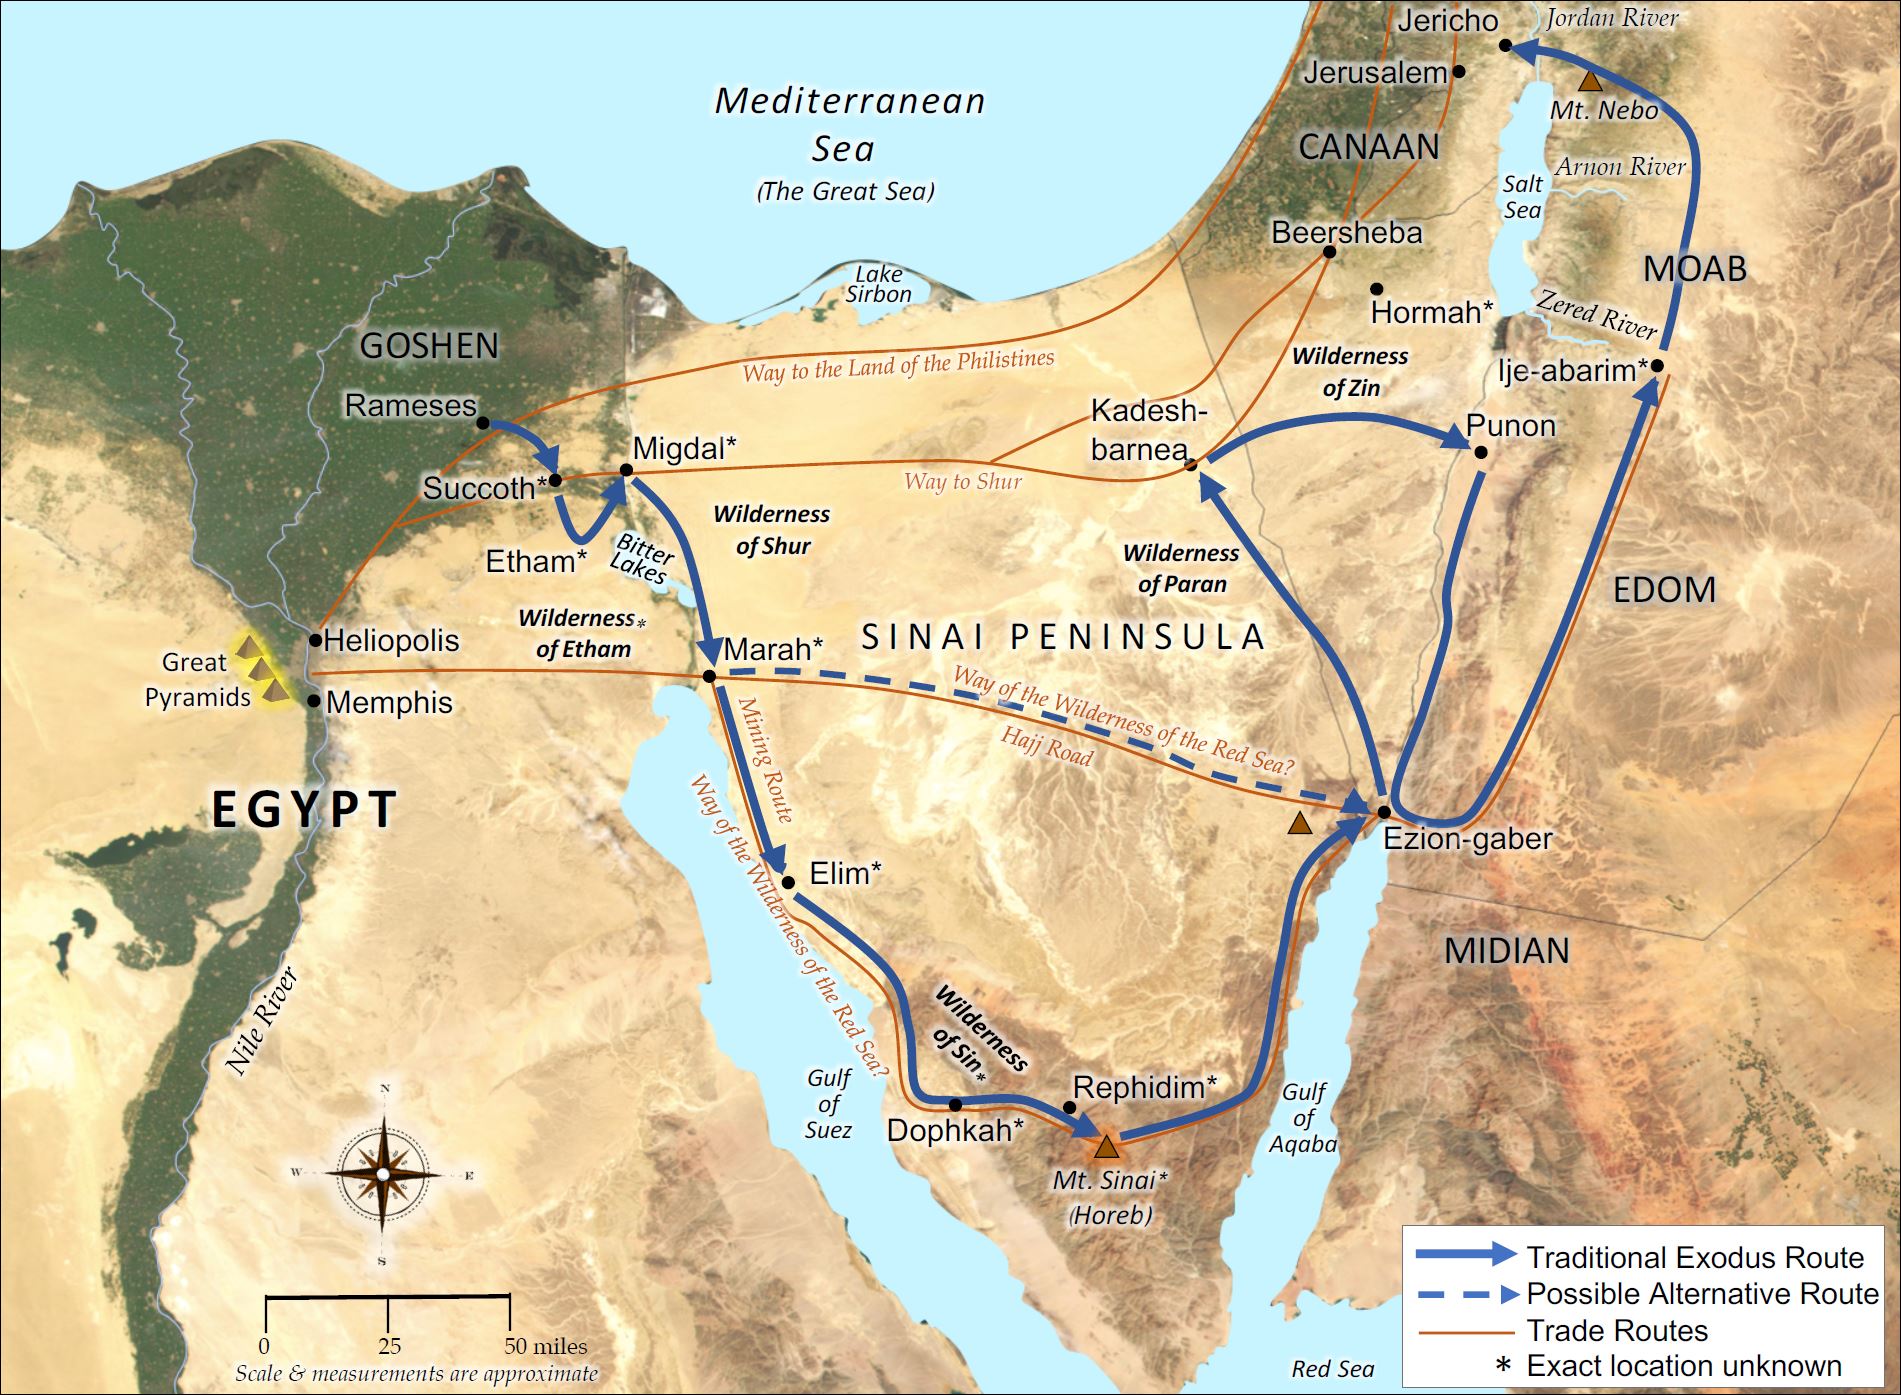 Israel's Exodus from Egypt to Canaan